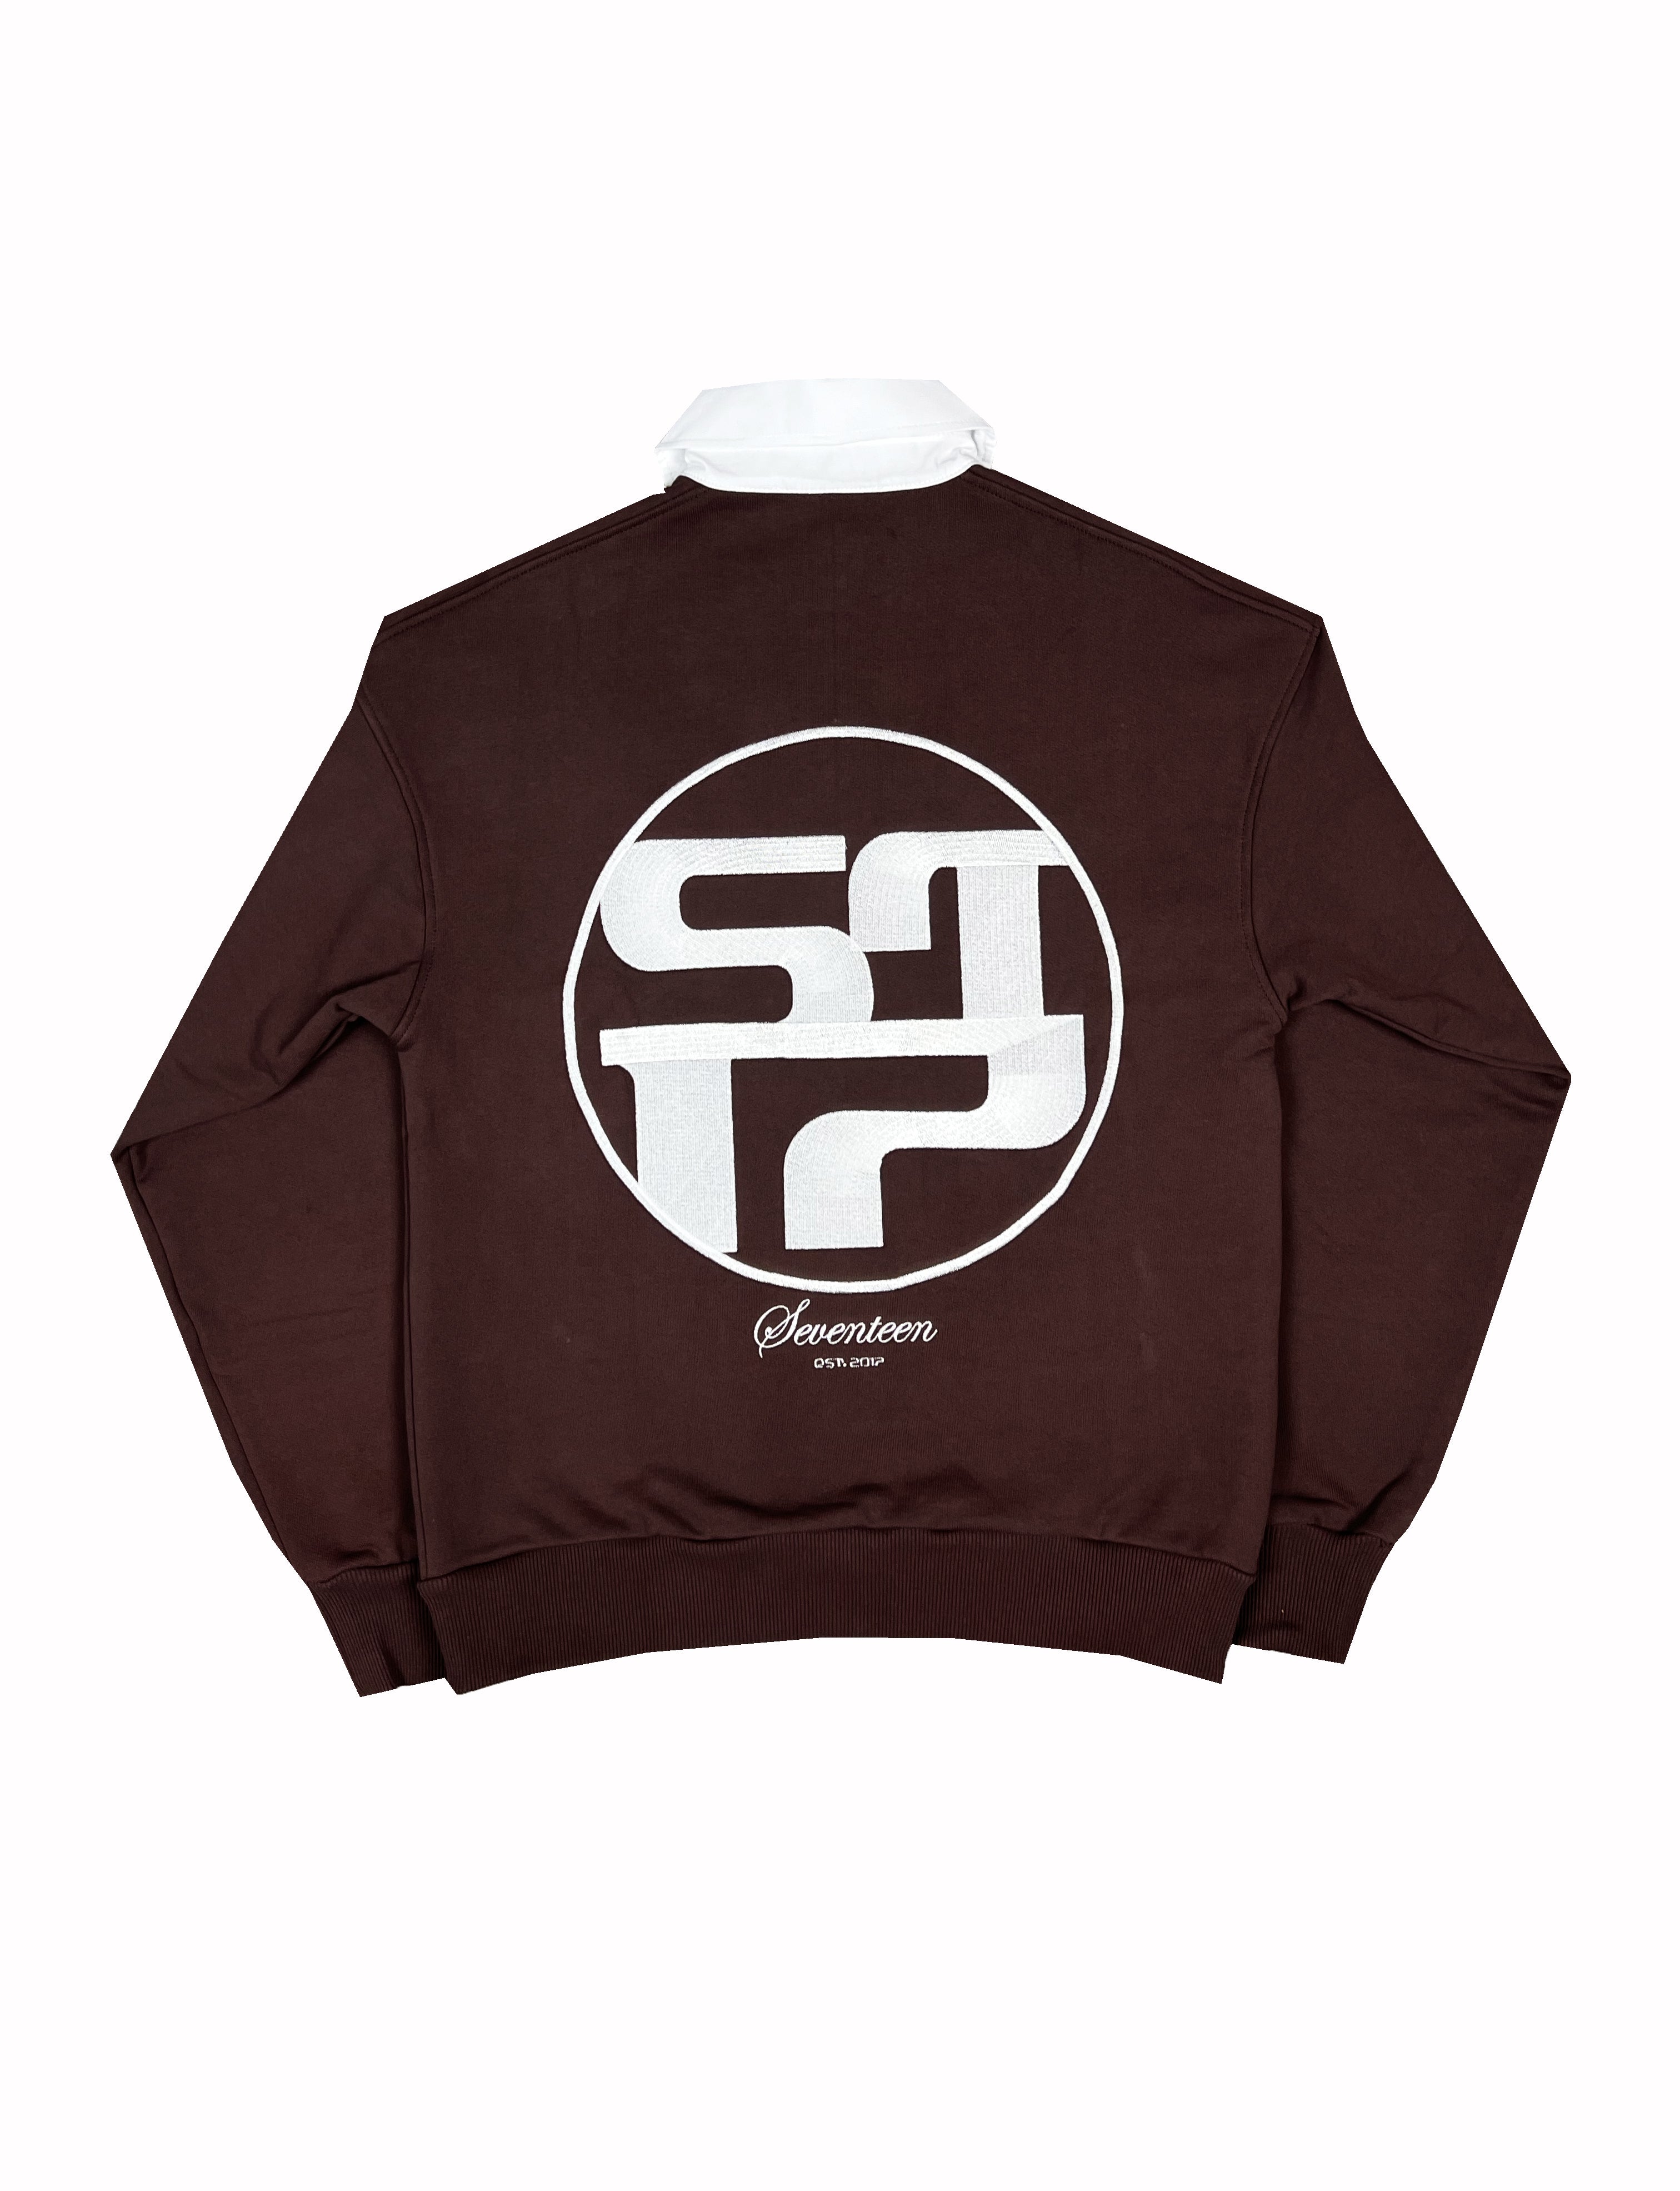 Run17up Athletes Brown Polo Sweater